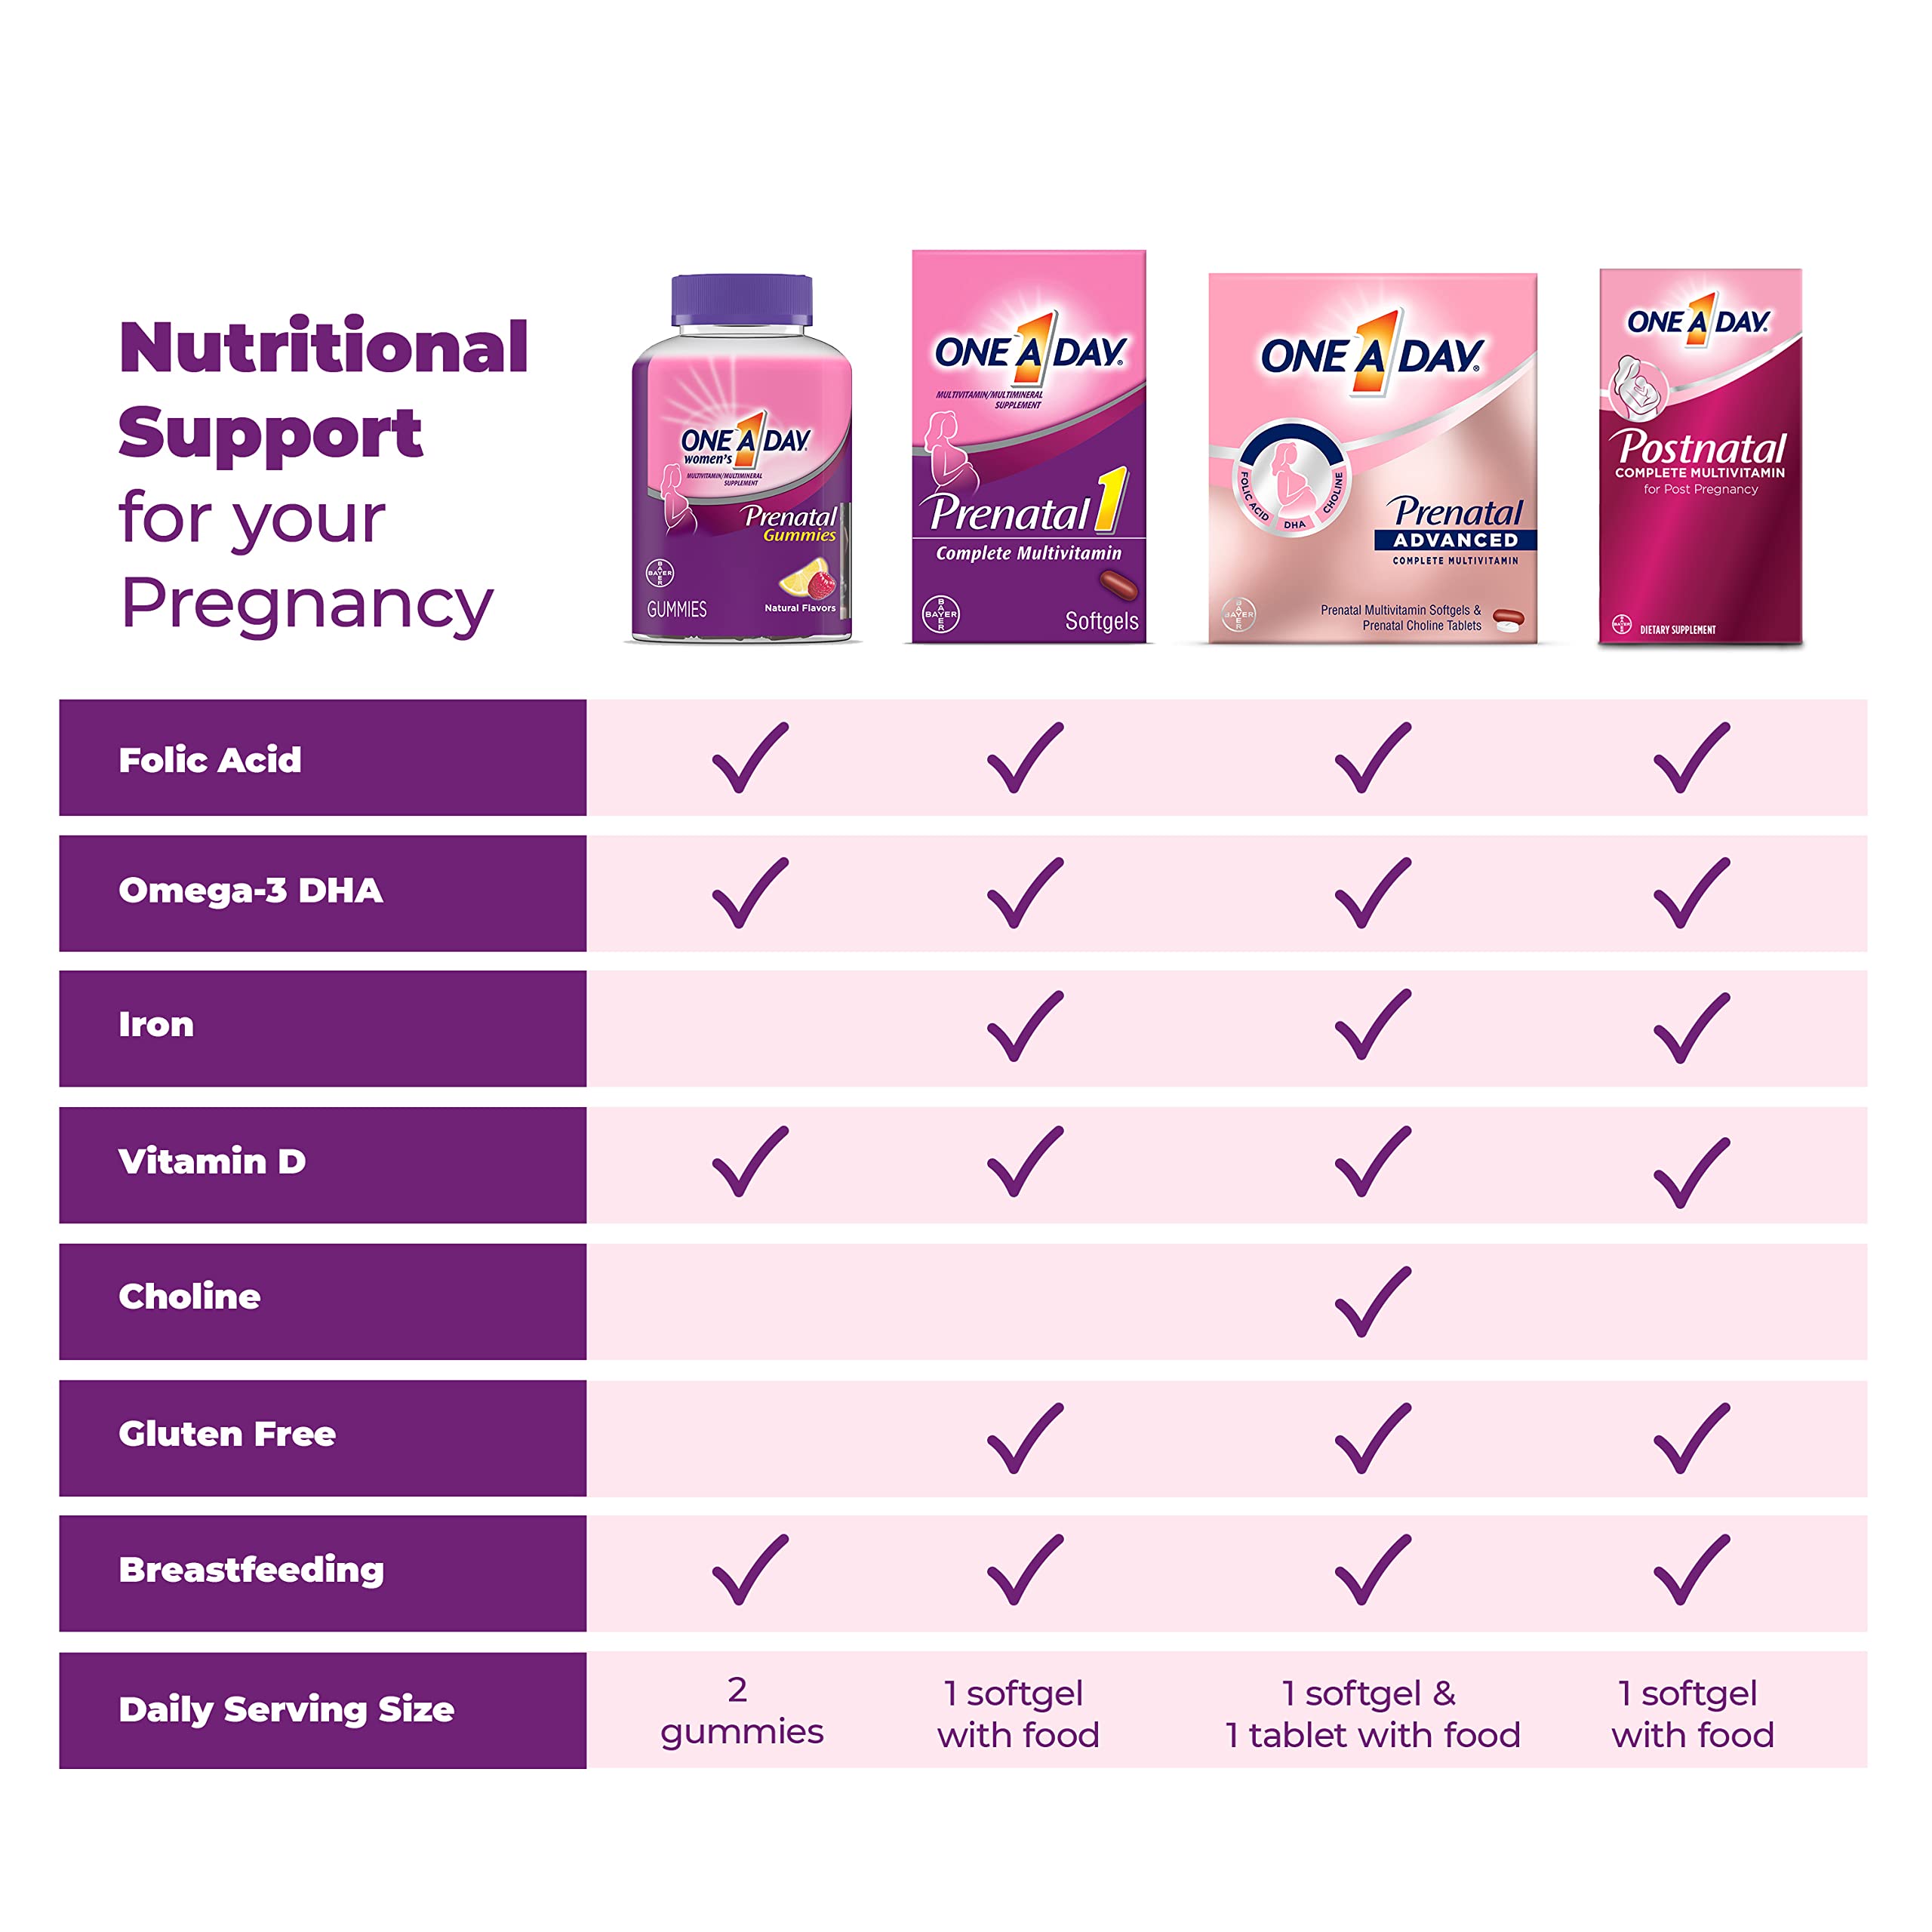 ONE A DAY Postnatal Complete Multivitamin for Post-Pregnancy with Folic Acid and Omega-3 DHA, 60 Count